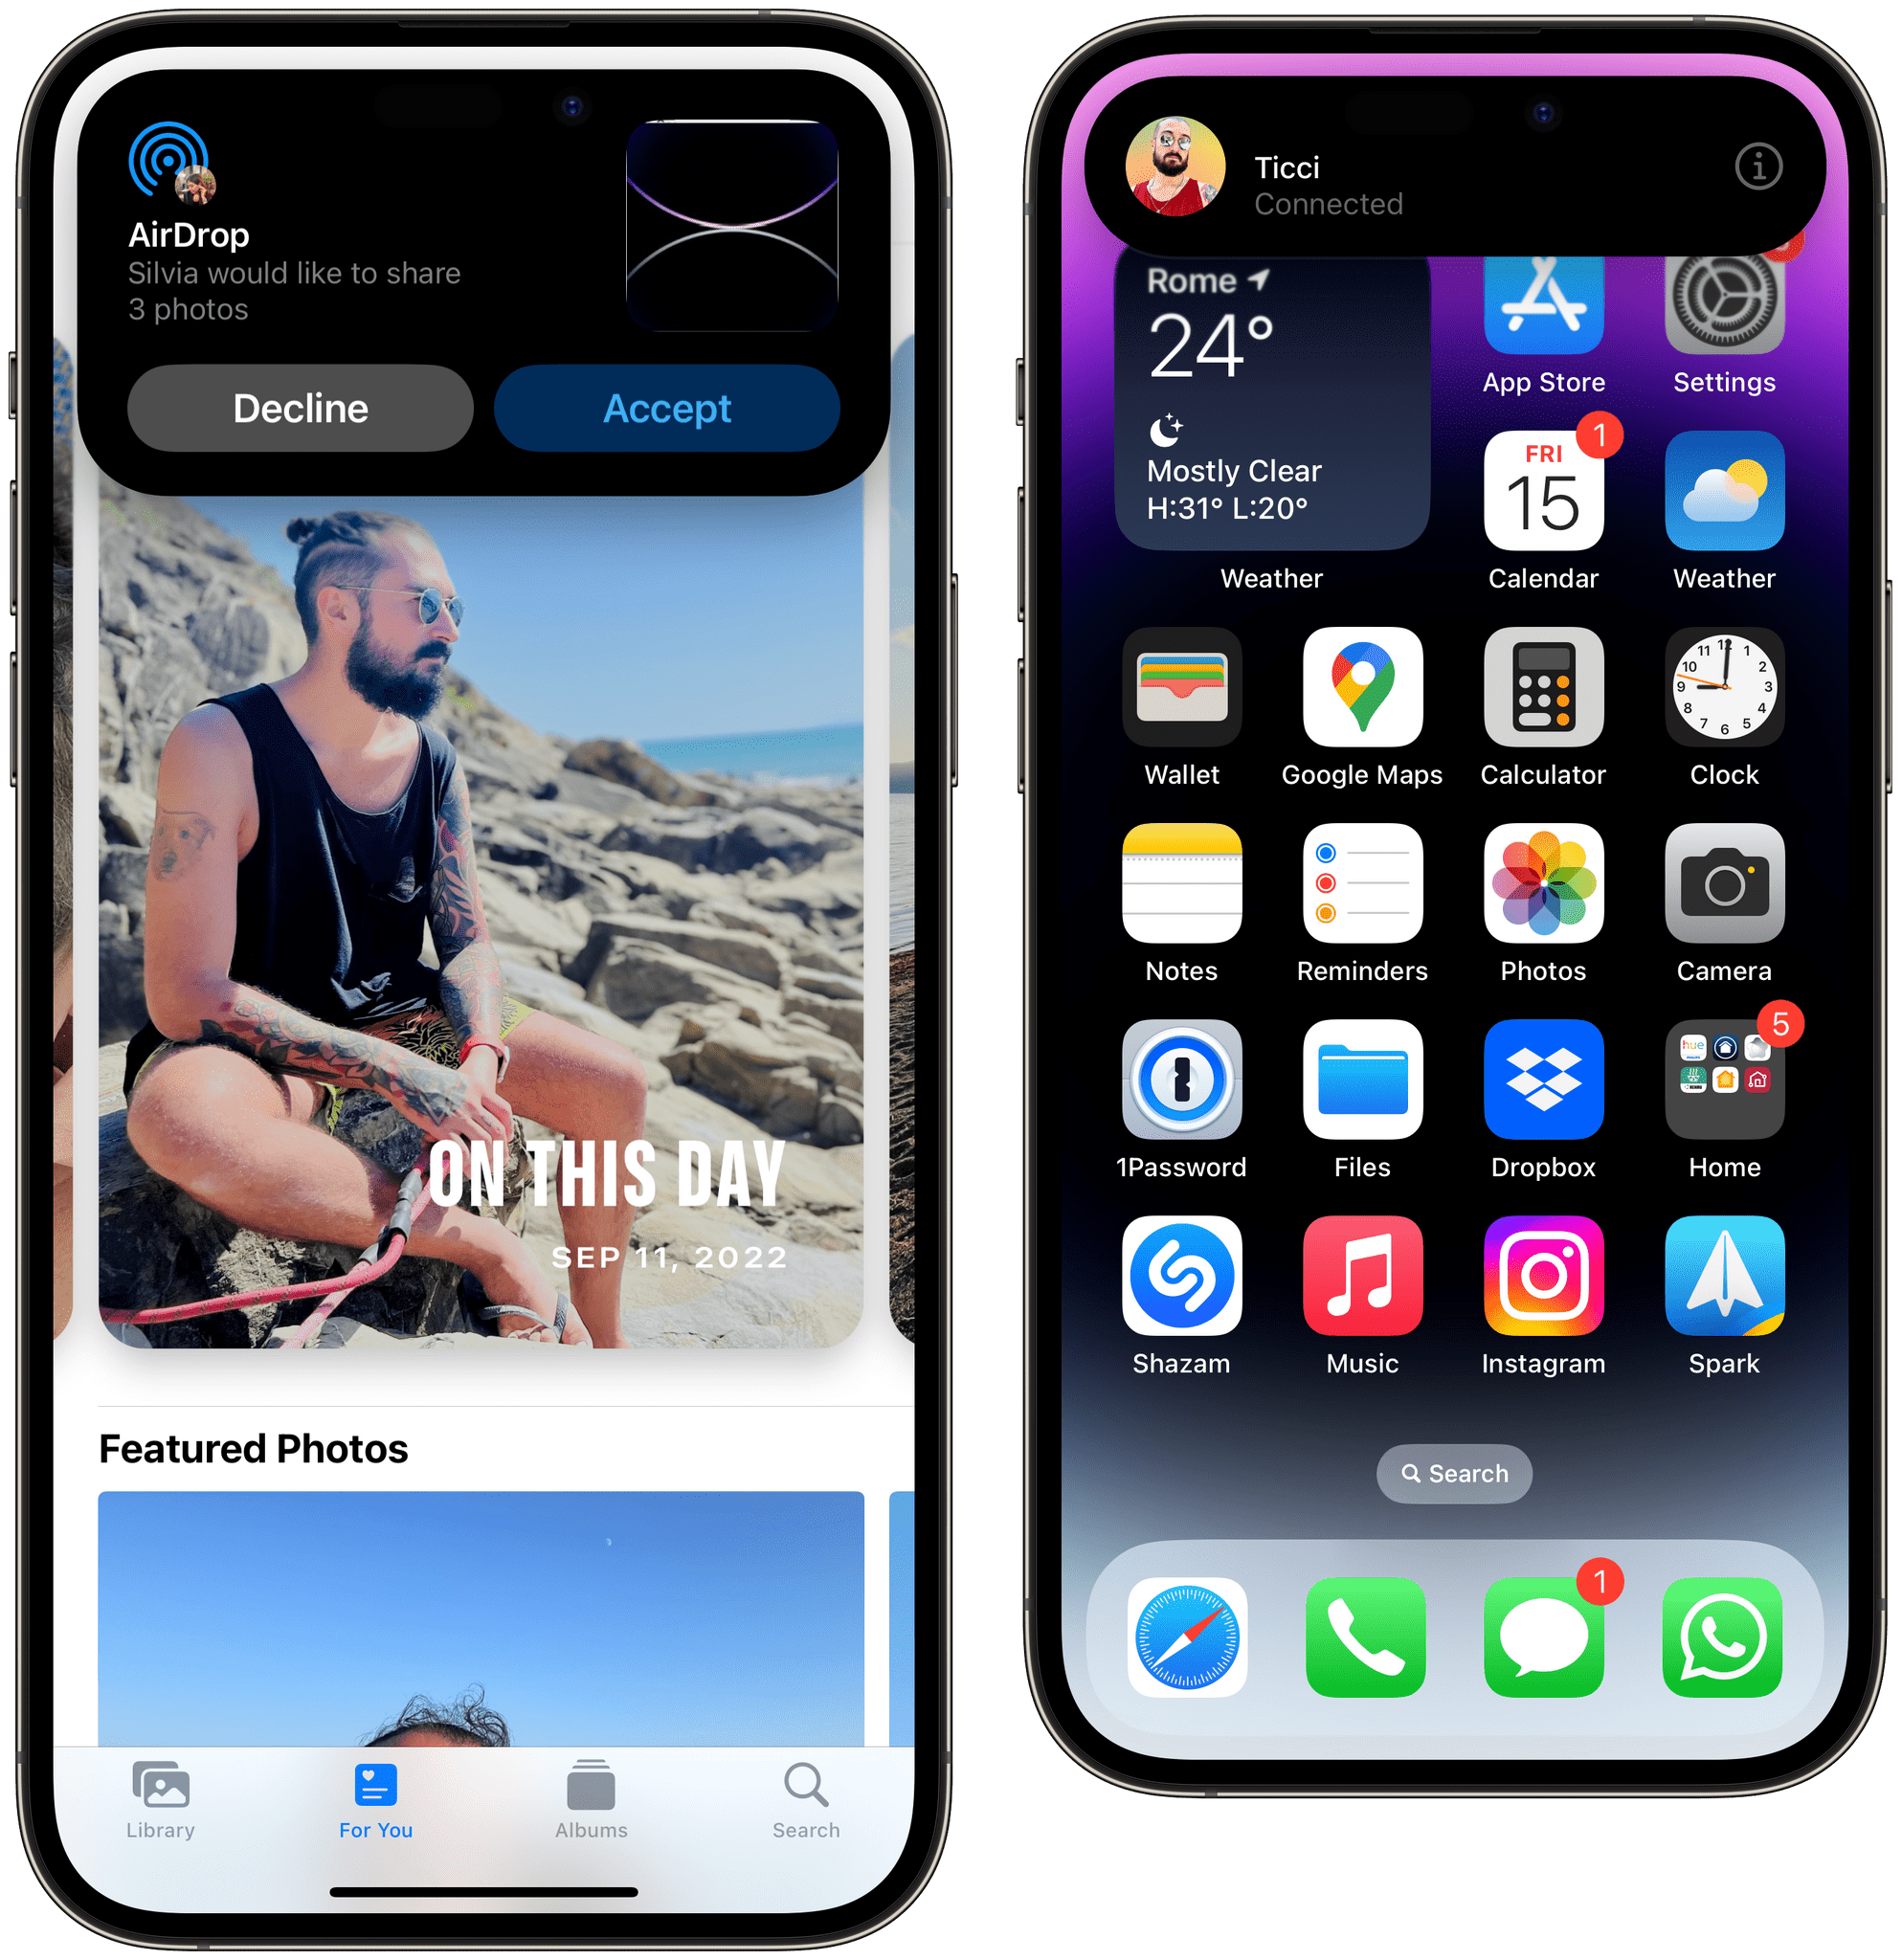 When you're not using proximity-based sharing, AirDrop alerts will be displayed in the Dynamic Island (left). The Dynamic Island is also used to show you other people's connected devices that are ready to receive shared items.